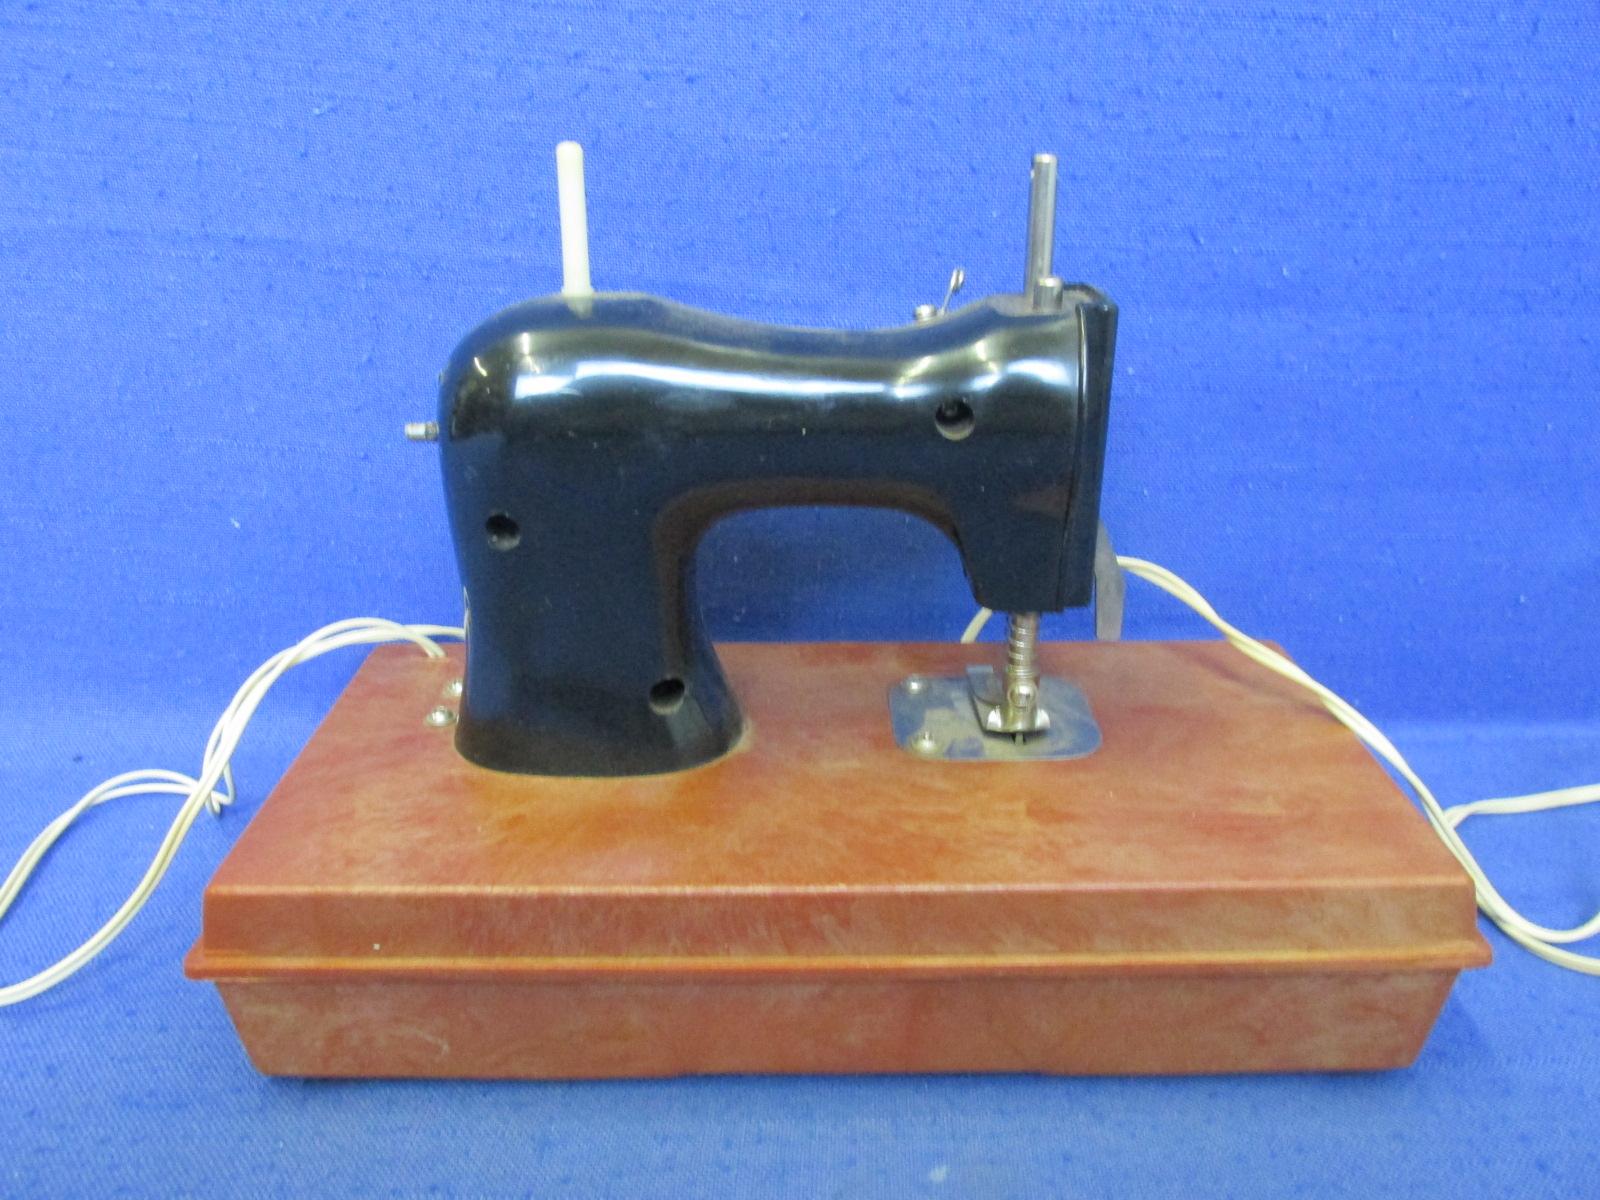 Vintage –1975 Holly Hobbie Toy Plastic Sewing Machine &Foot Pedal 9 1/4”L x 7”H x 4 1/2”D –